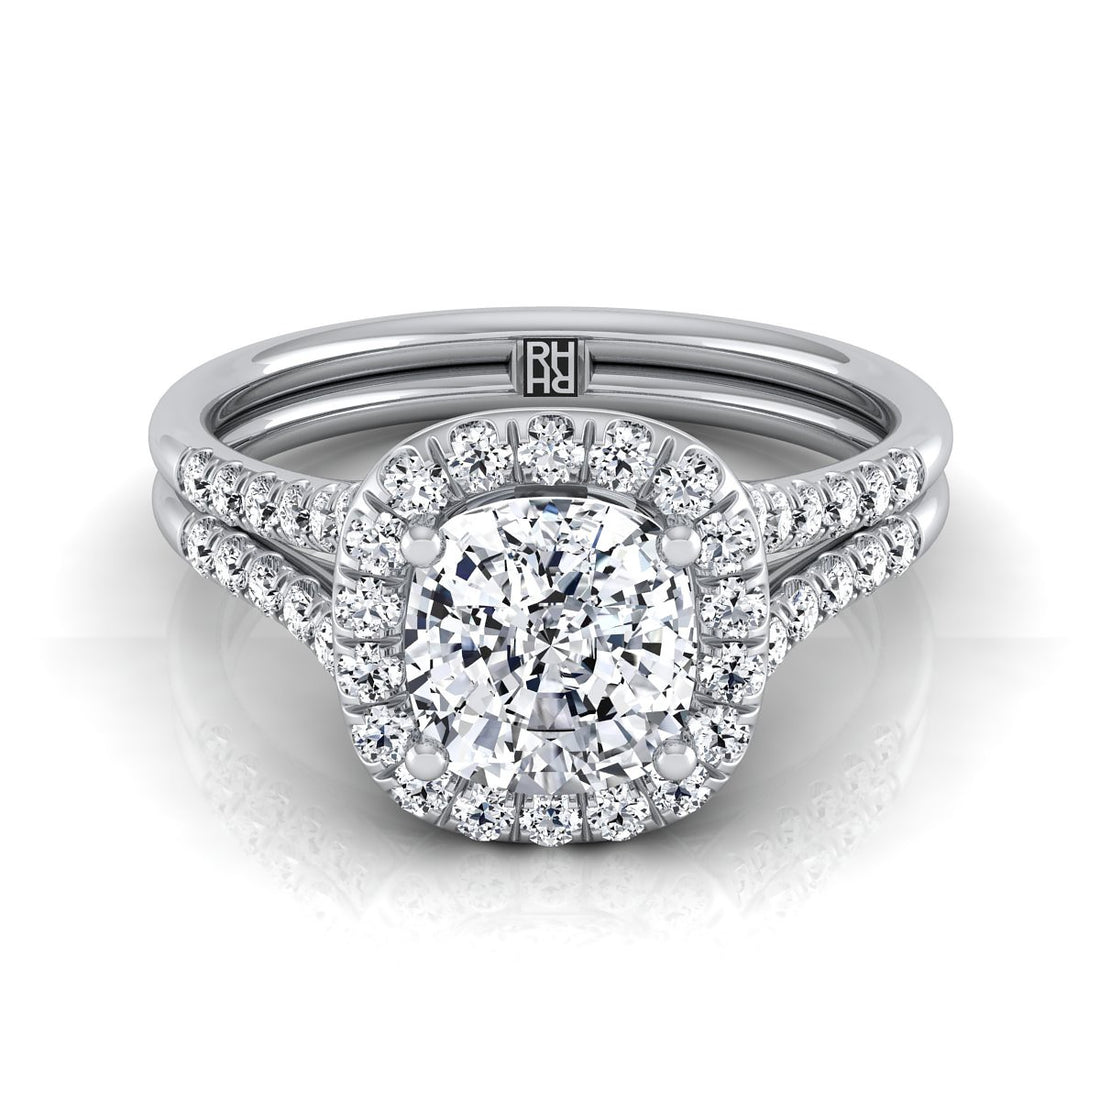 Why Consider Wedding Rings with Big Diamonds?